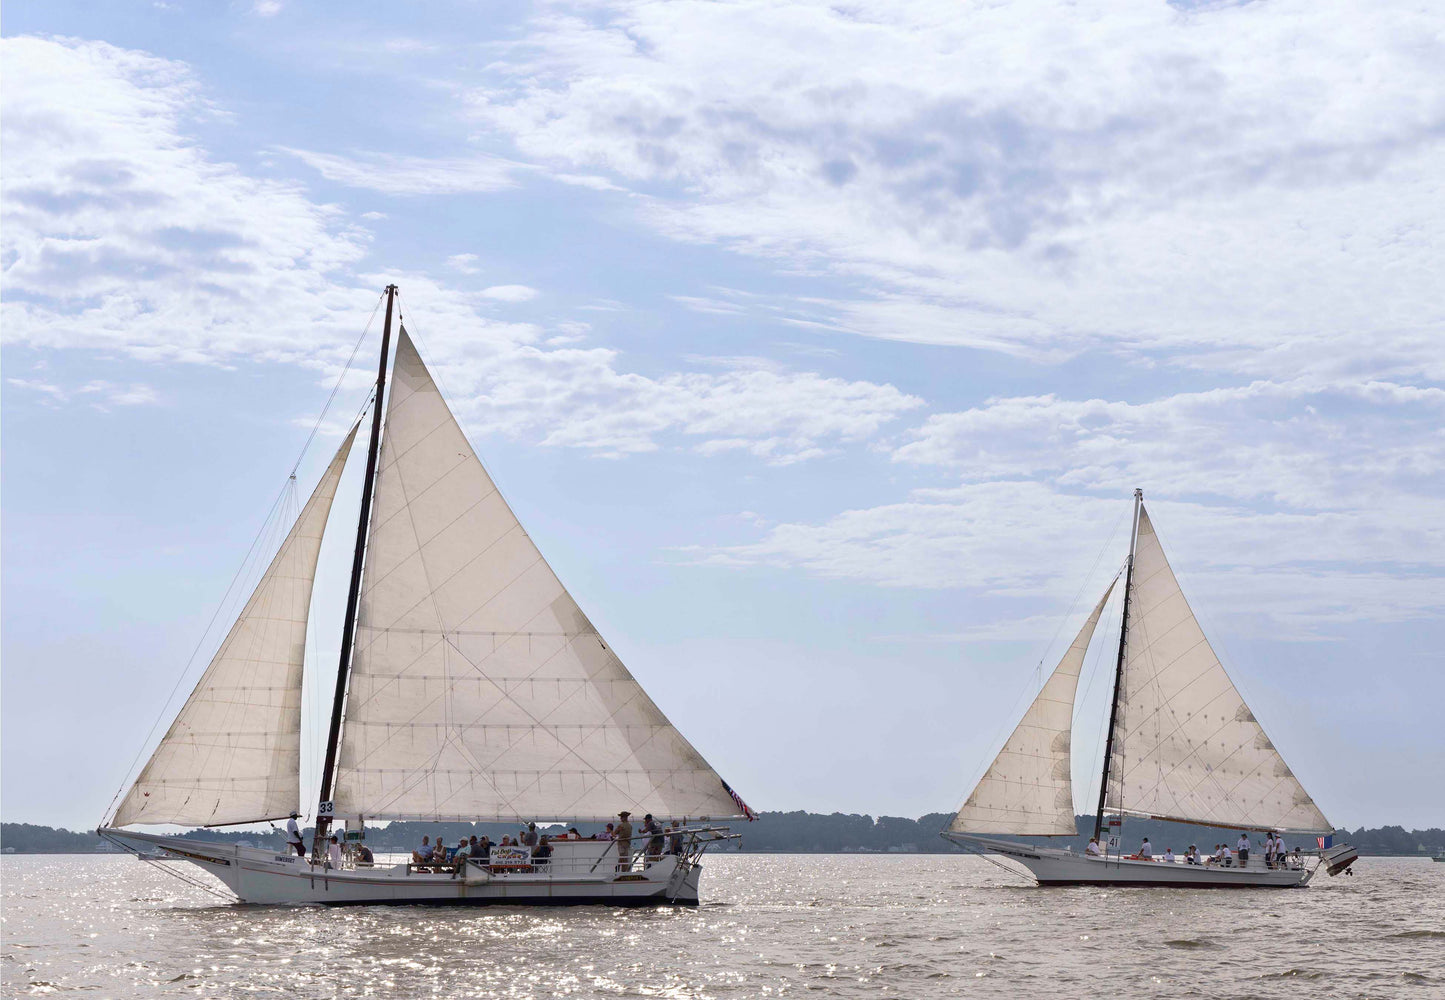 2023 Deal Island Skipjack Races - The Somerset Leads the Ida May